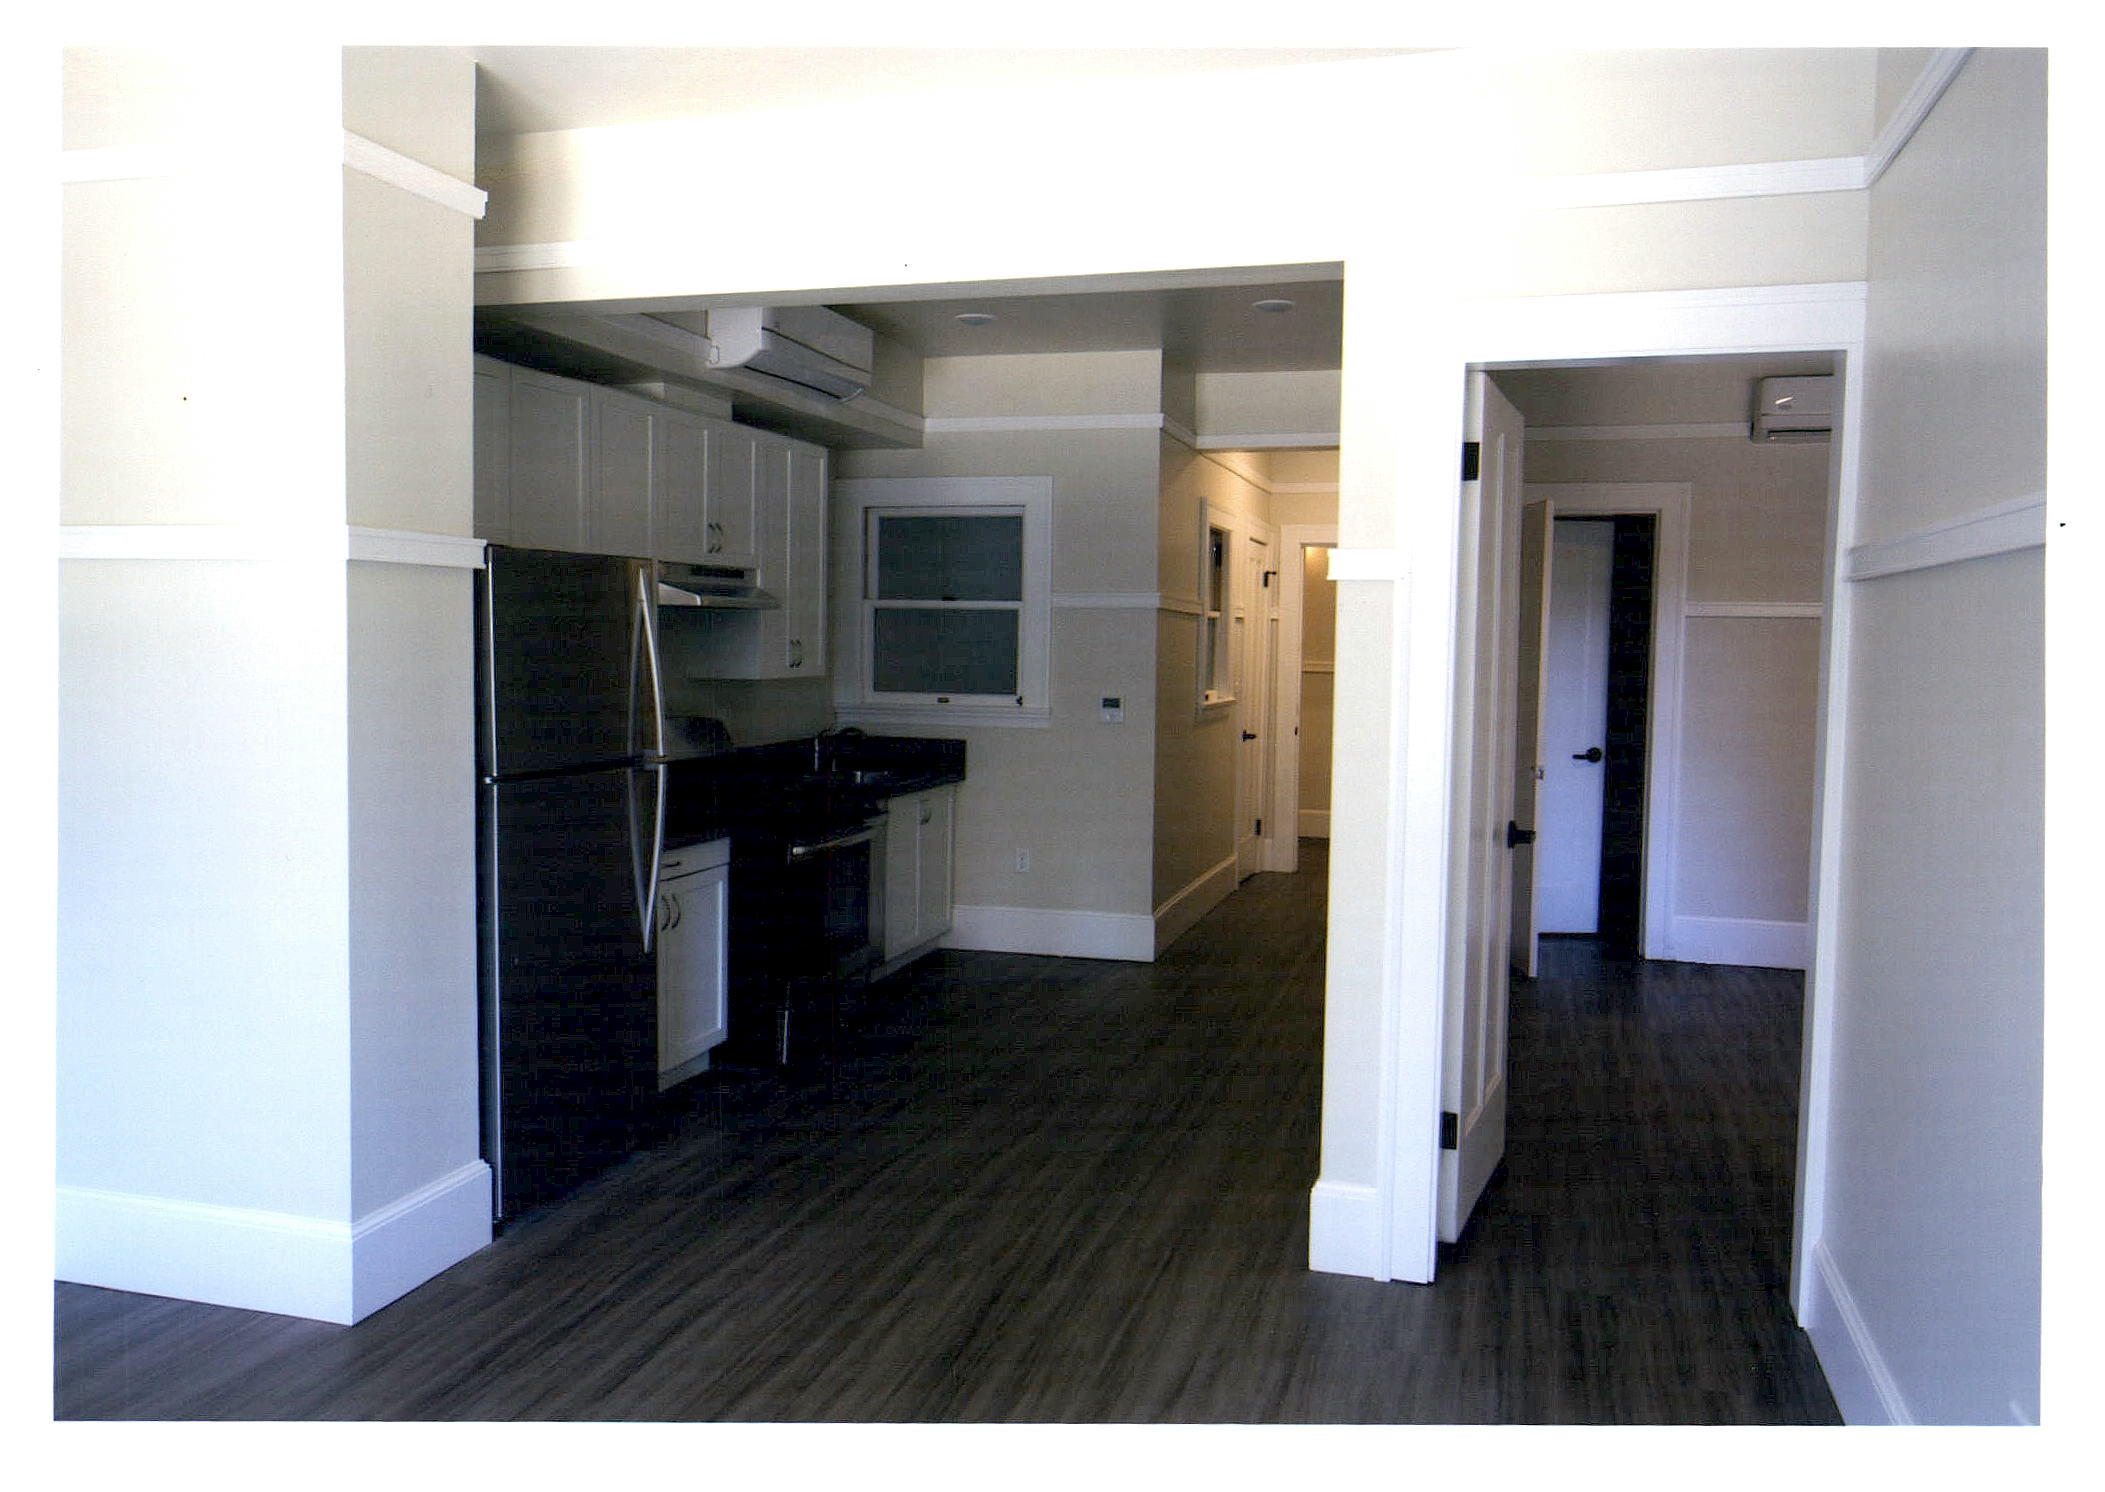 After:  another apartment unit looking towards the hall entrance. Note retained windows in light wells.